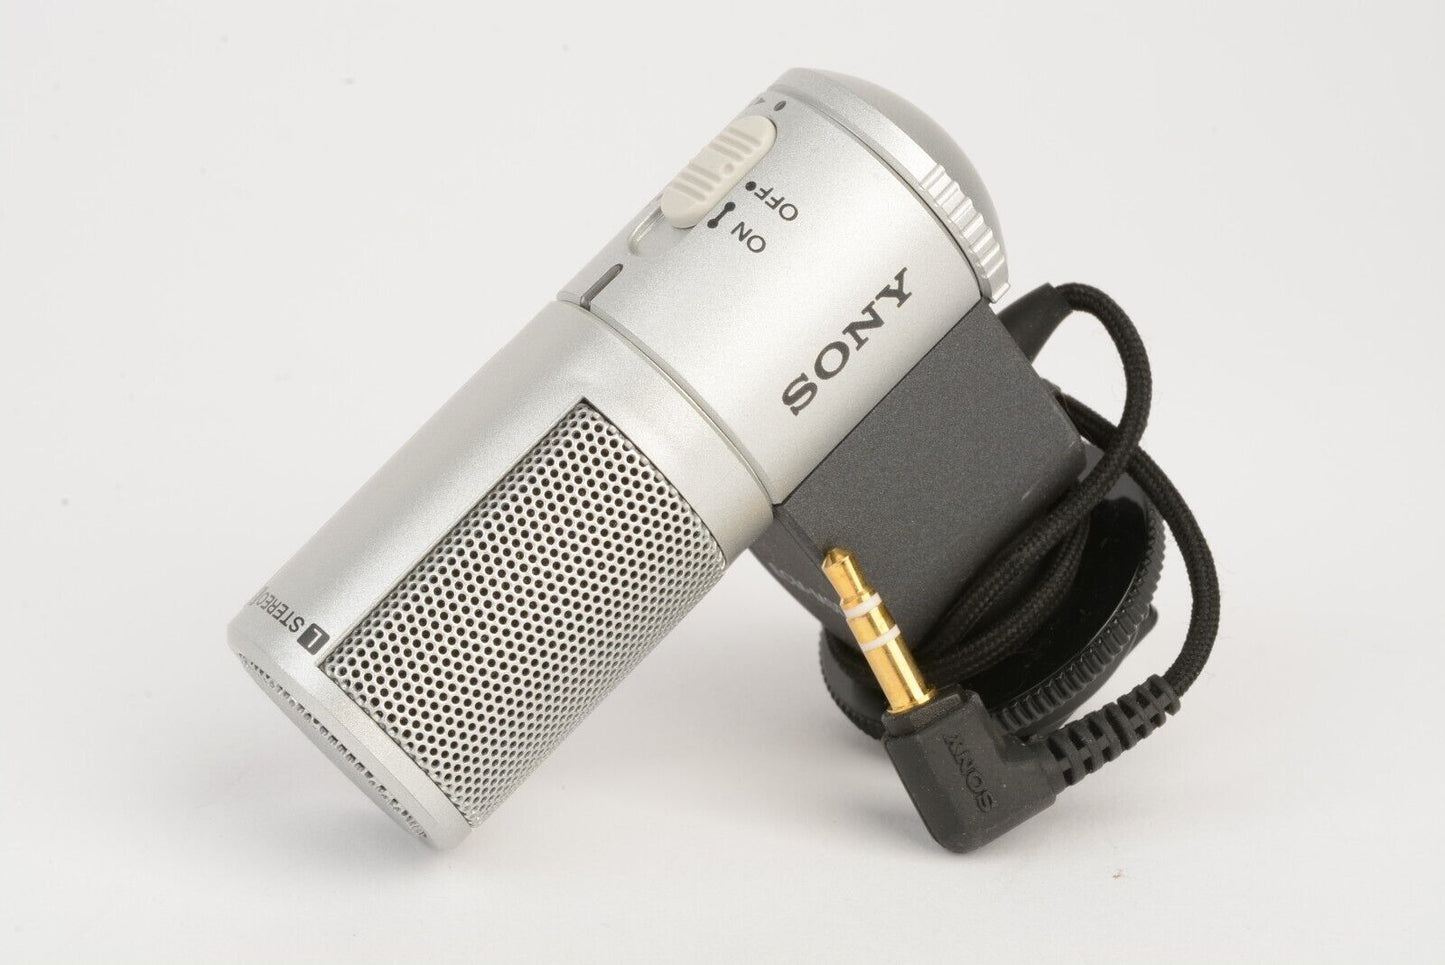 MINT- SONY ECM-MSD1 HIGH GRADE STEREO MICROPHONE IN POUCH, BARELY USED